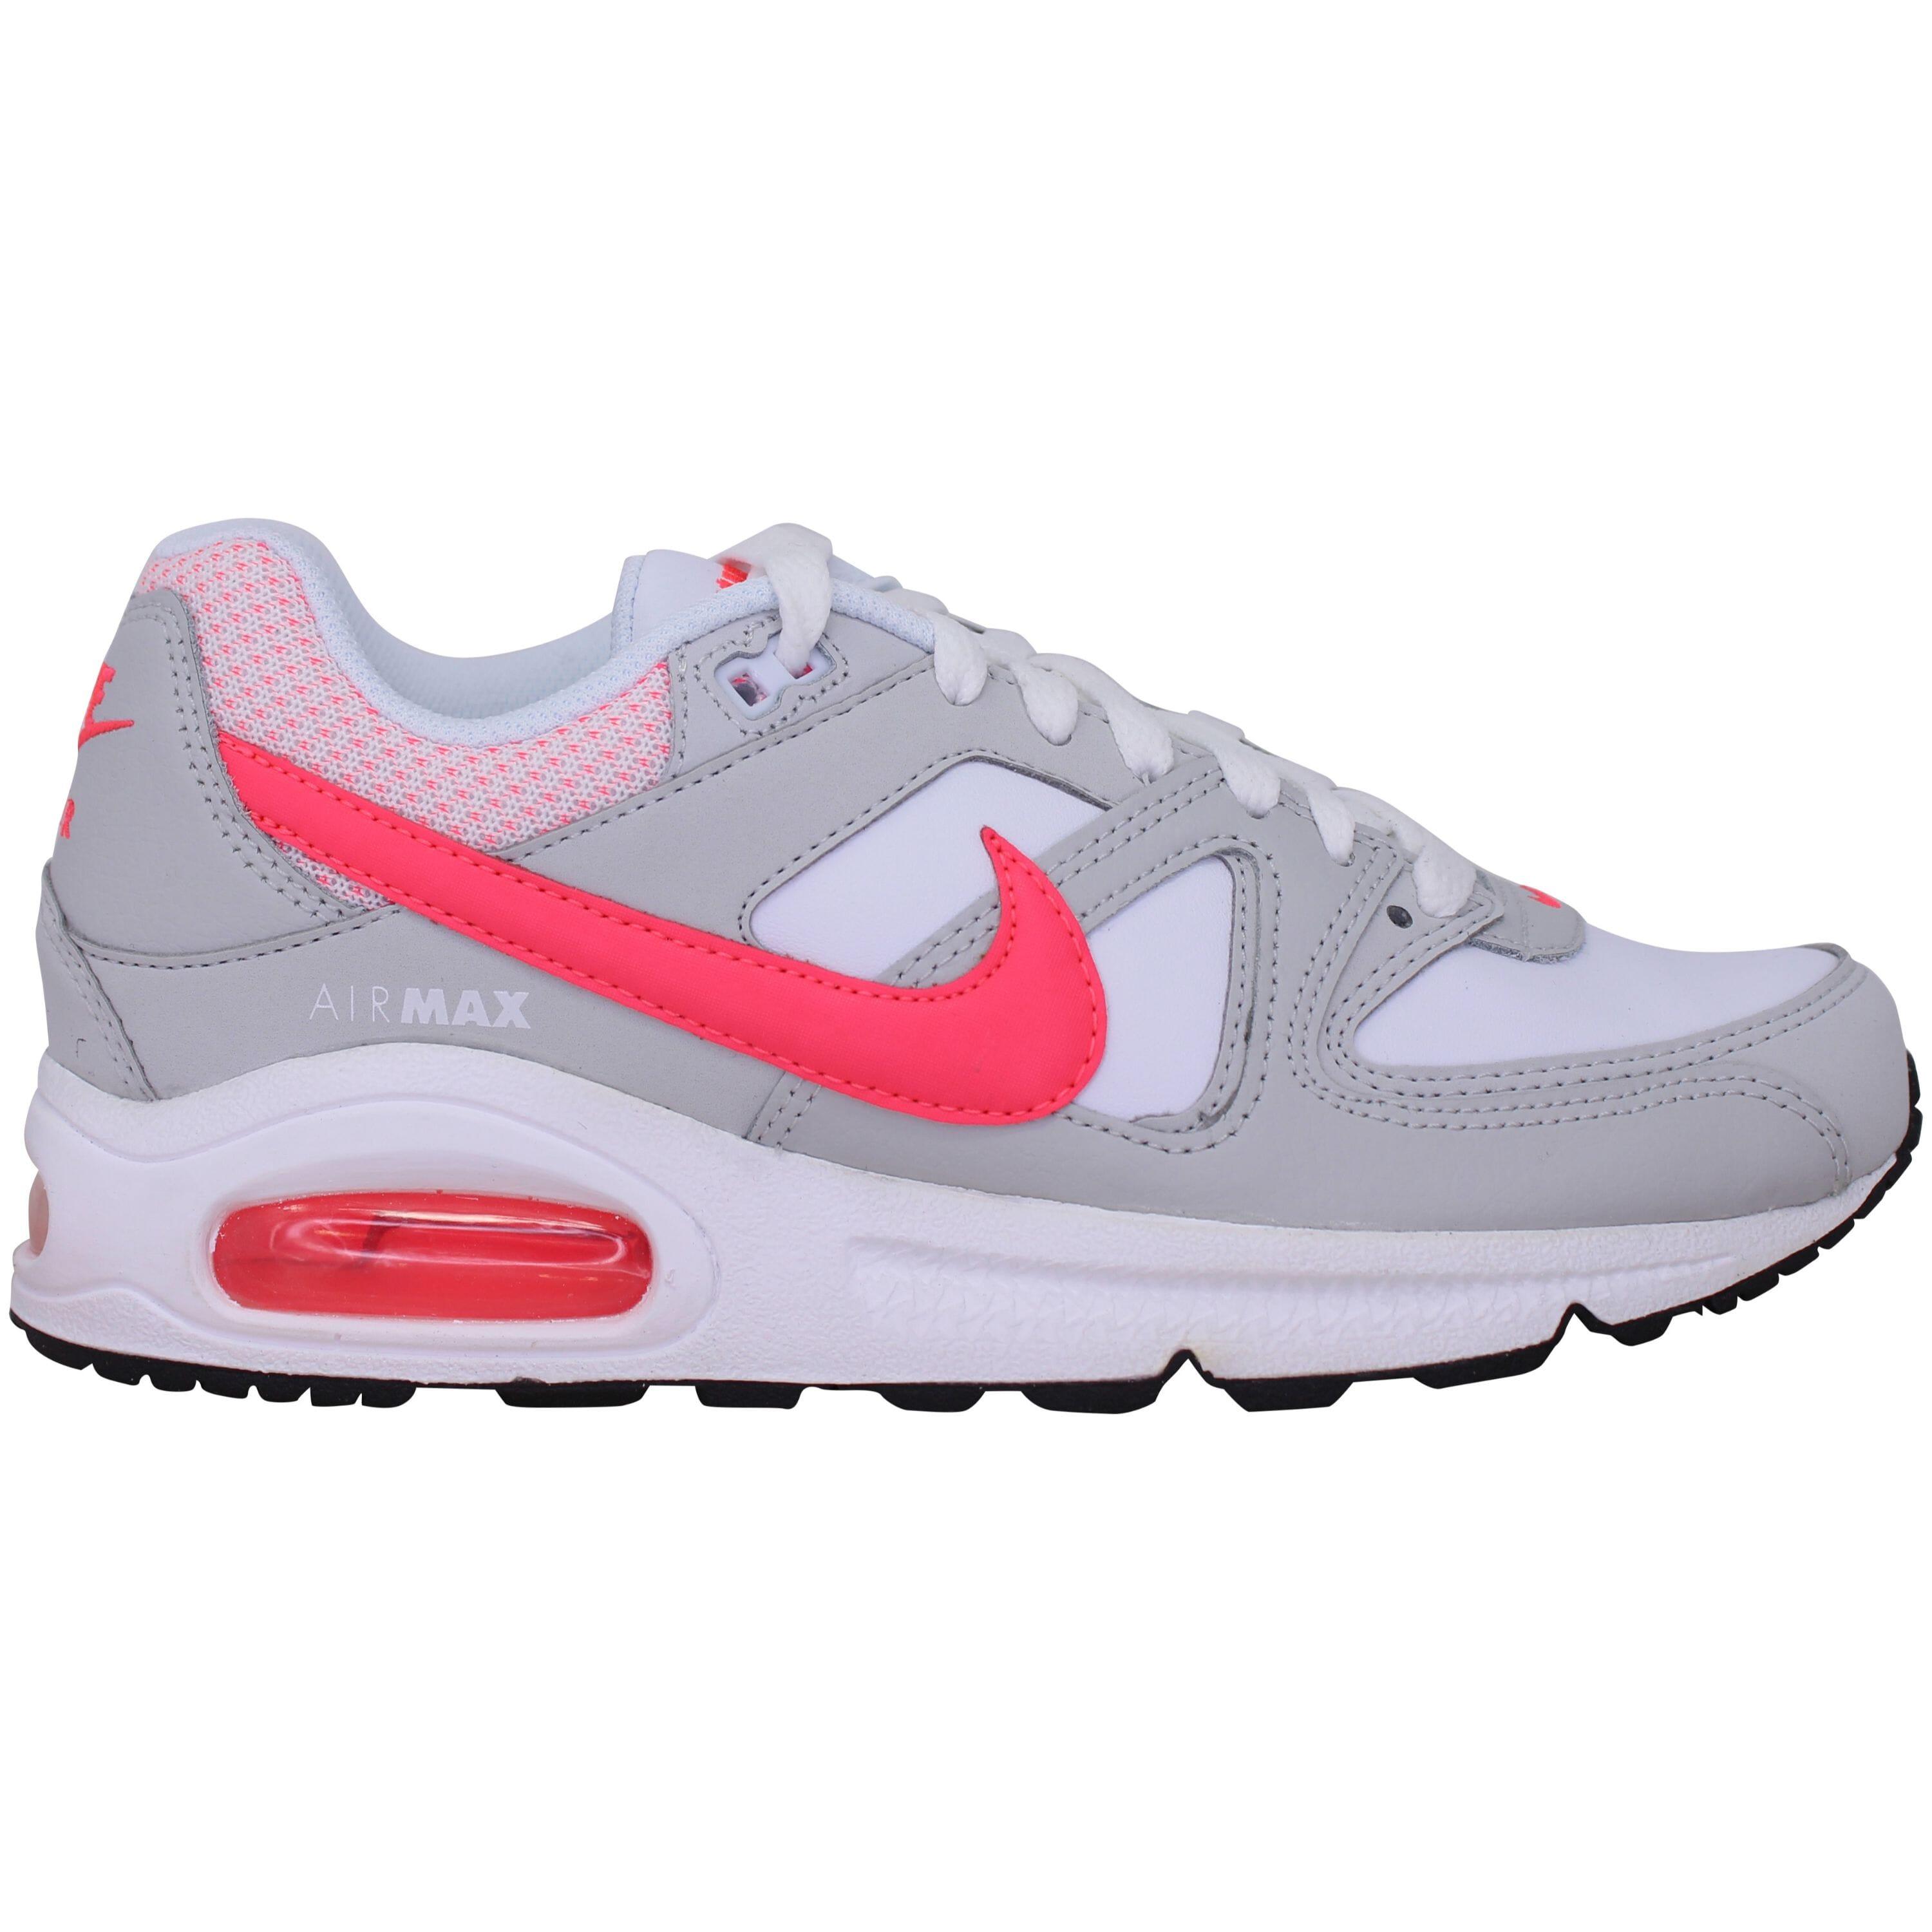 Nike Air Max Command /hyper Punch 397690-169 in Gray | Lyst